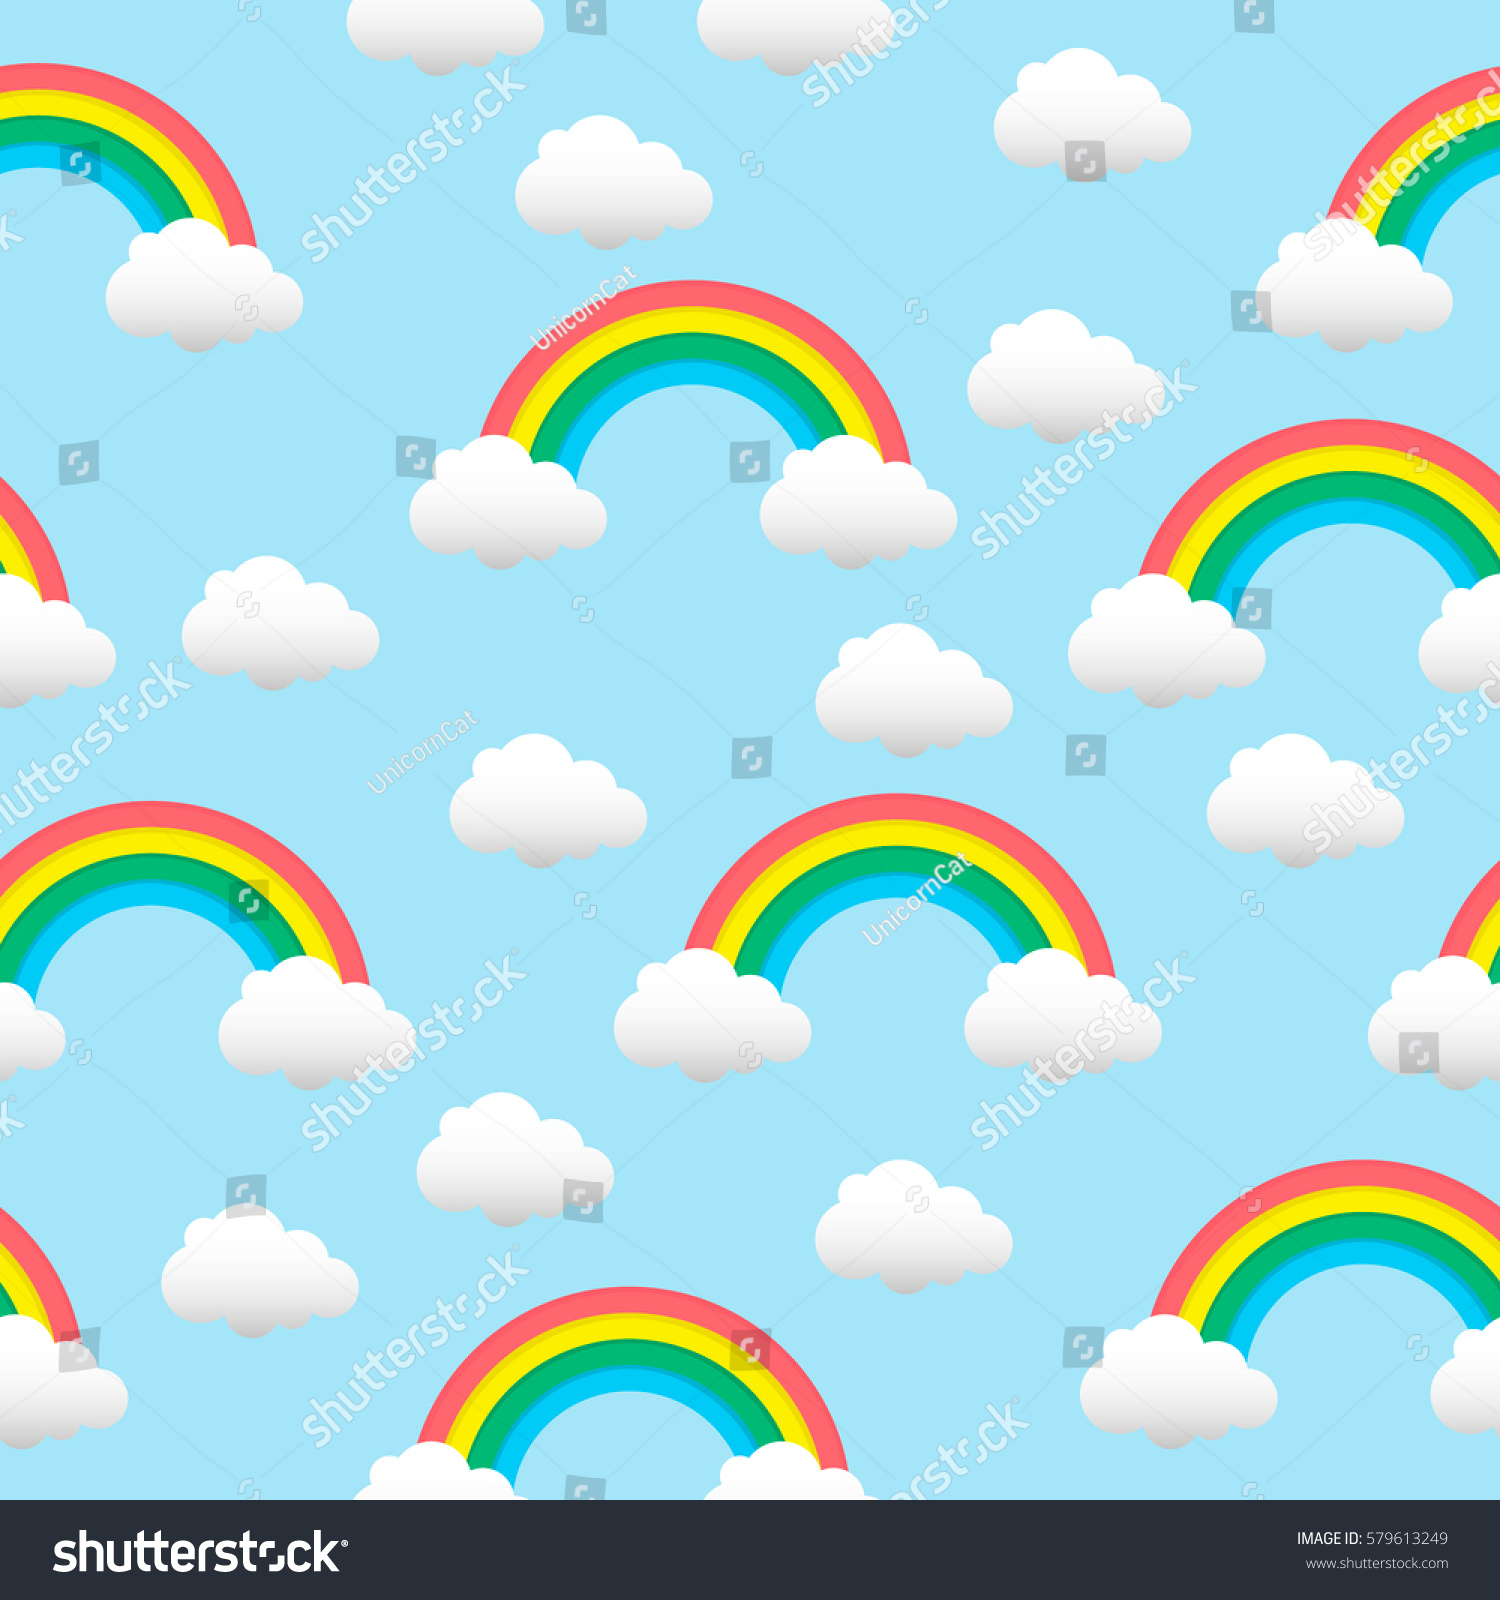 Pattern Rainbow Clouds Seamless Texture On Stock Vector 579613249 ...